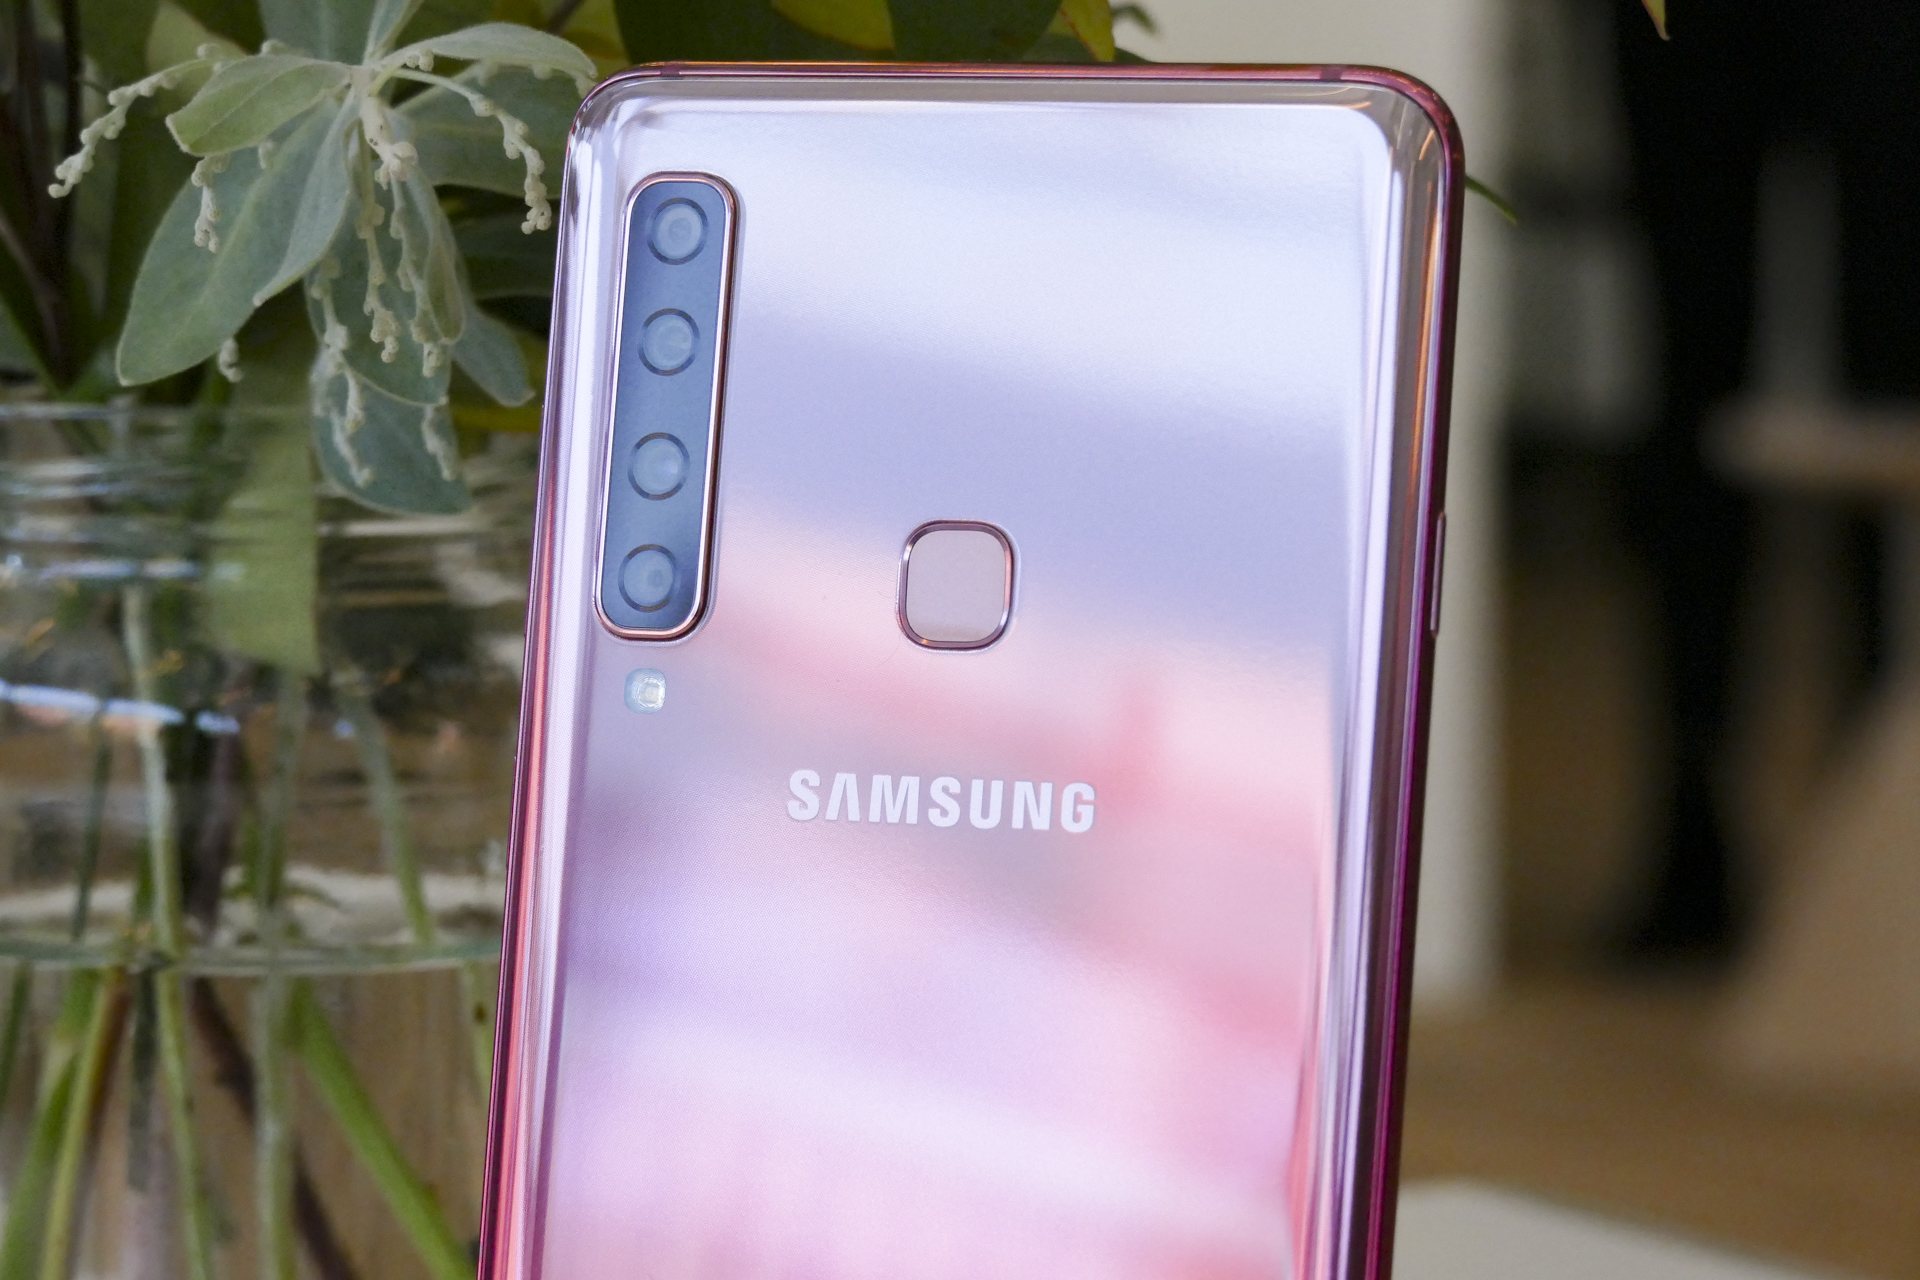 Hands on: Samsung Galaxy A9 (2018) review